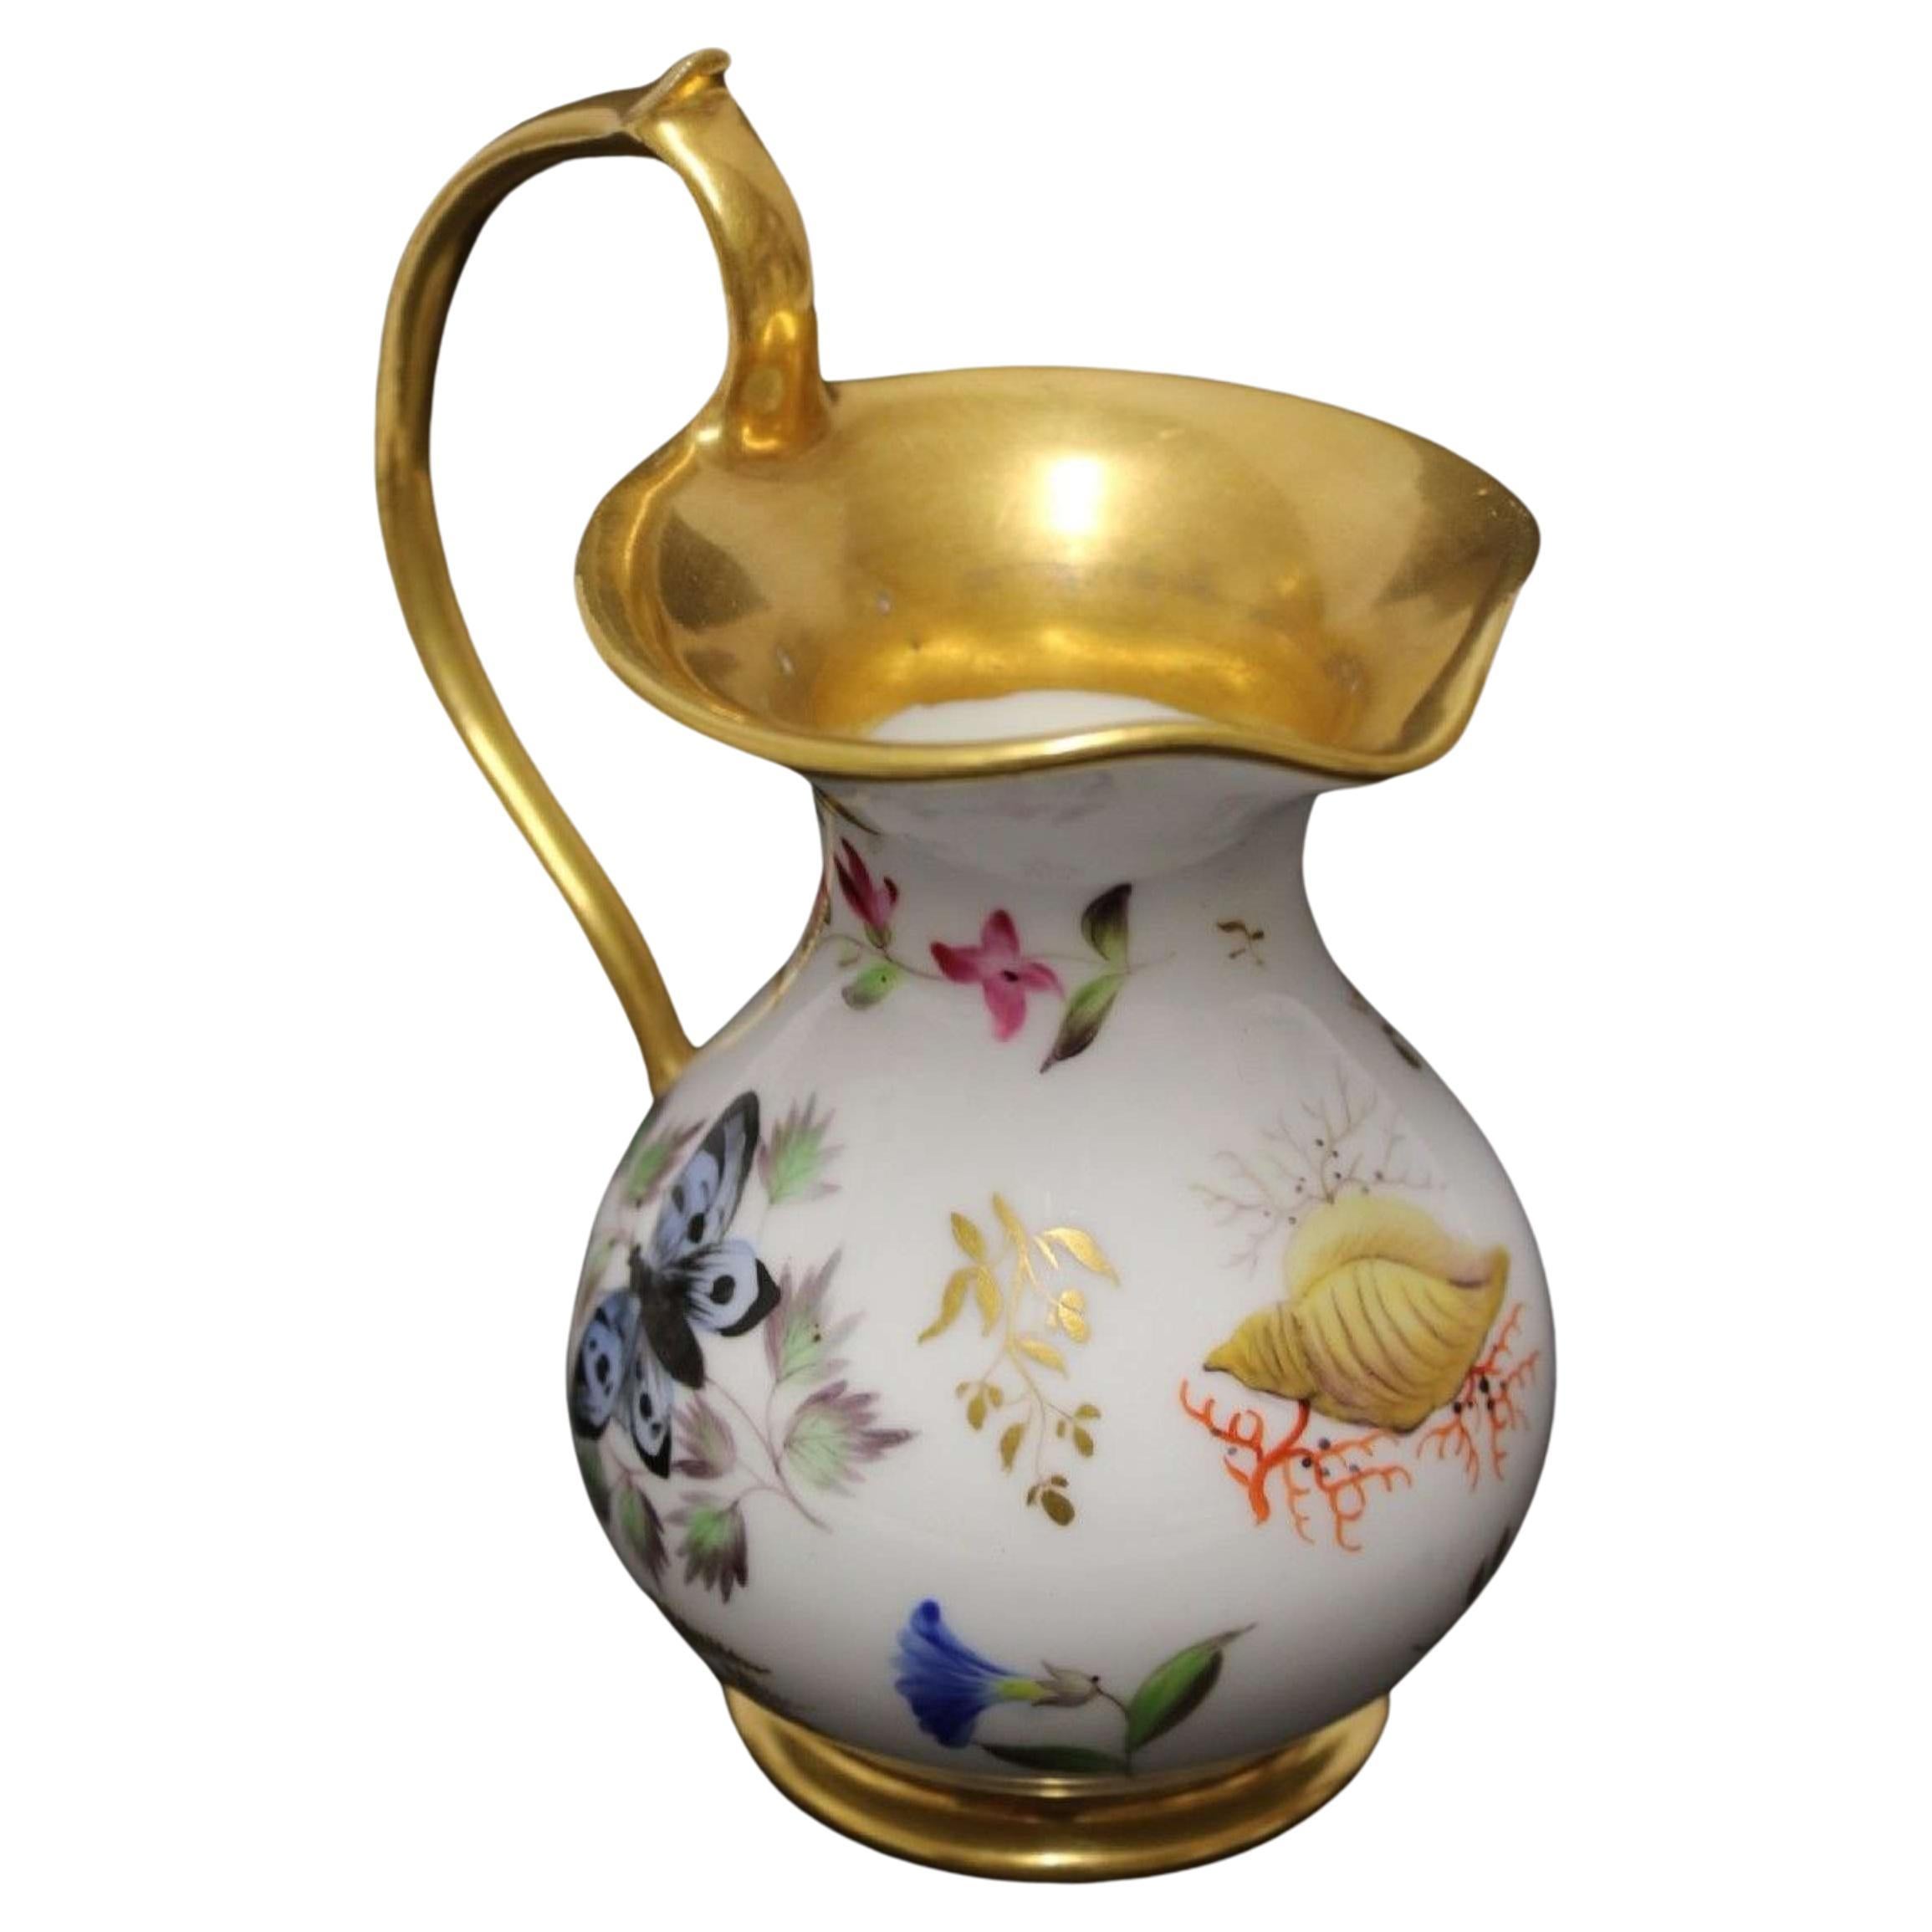 An early 19th century French porcelain miniature ewer